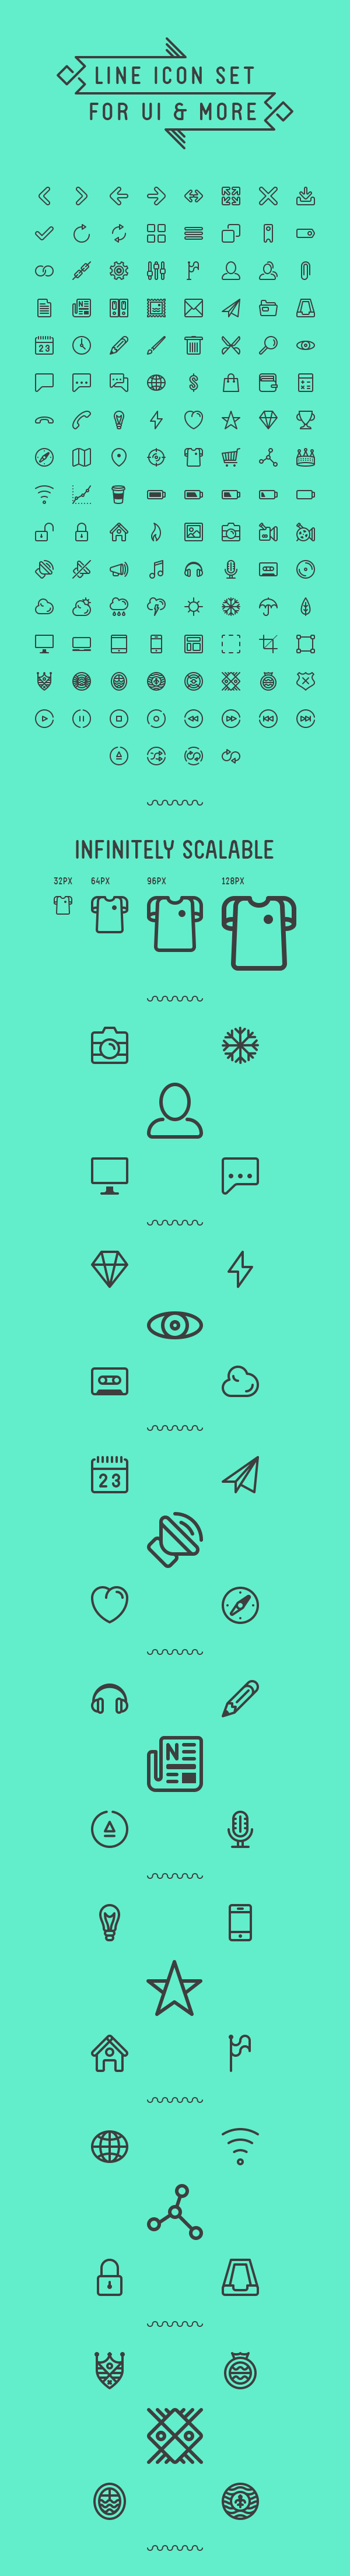 Line Icon Set For UI & More // Infinitely Scalable